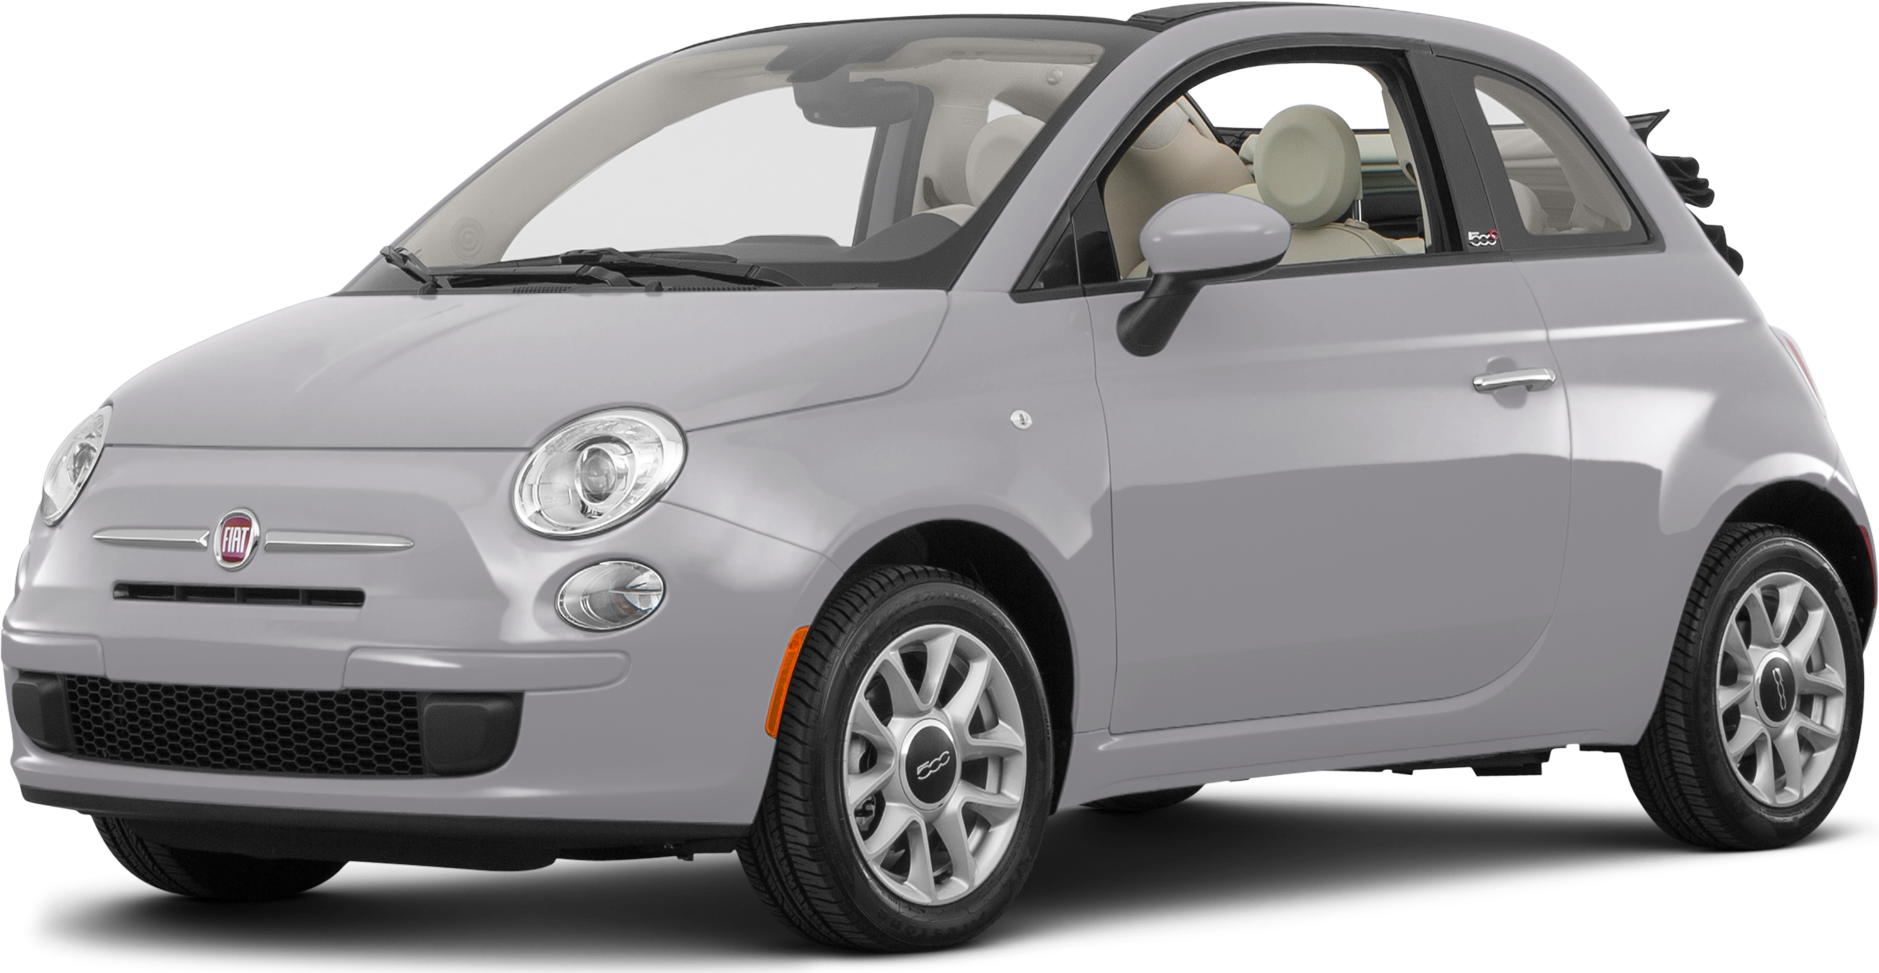 Fiat White Classic HQ Image Free PNG Image